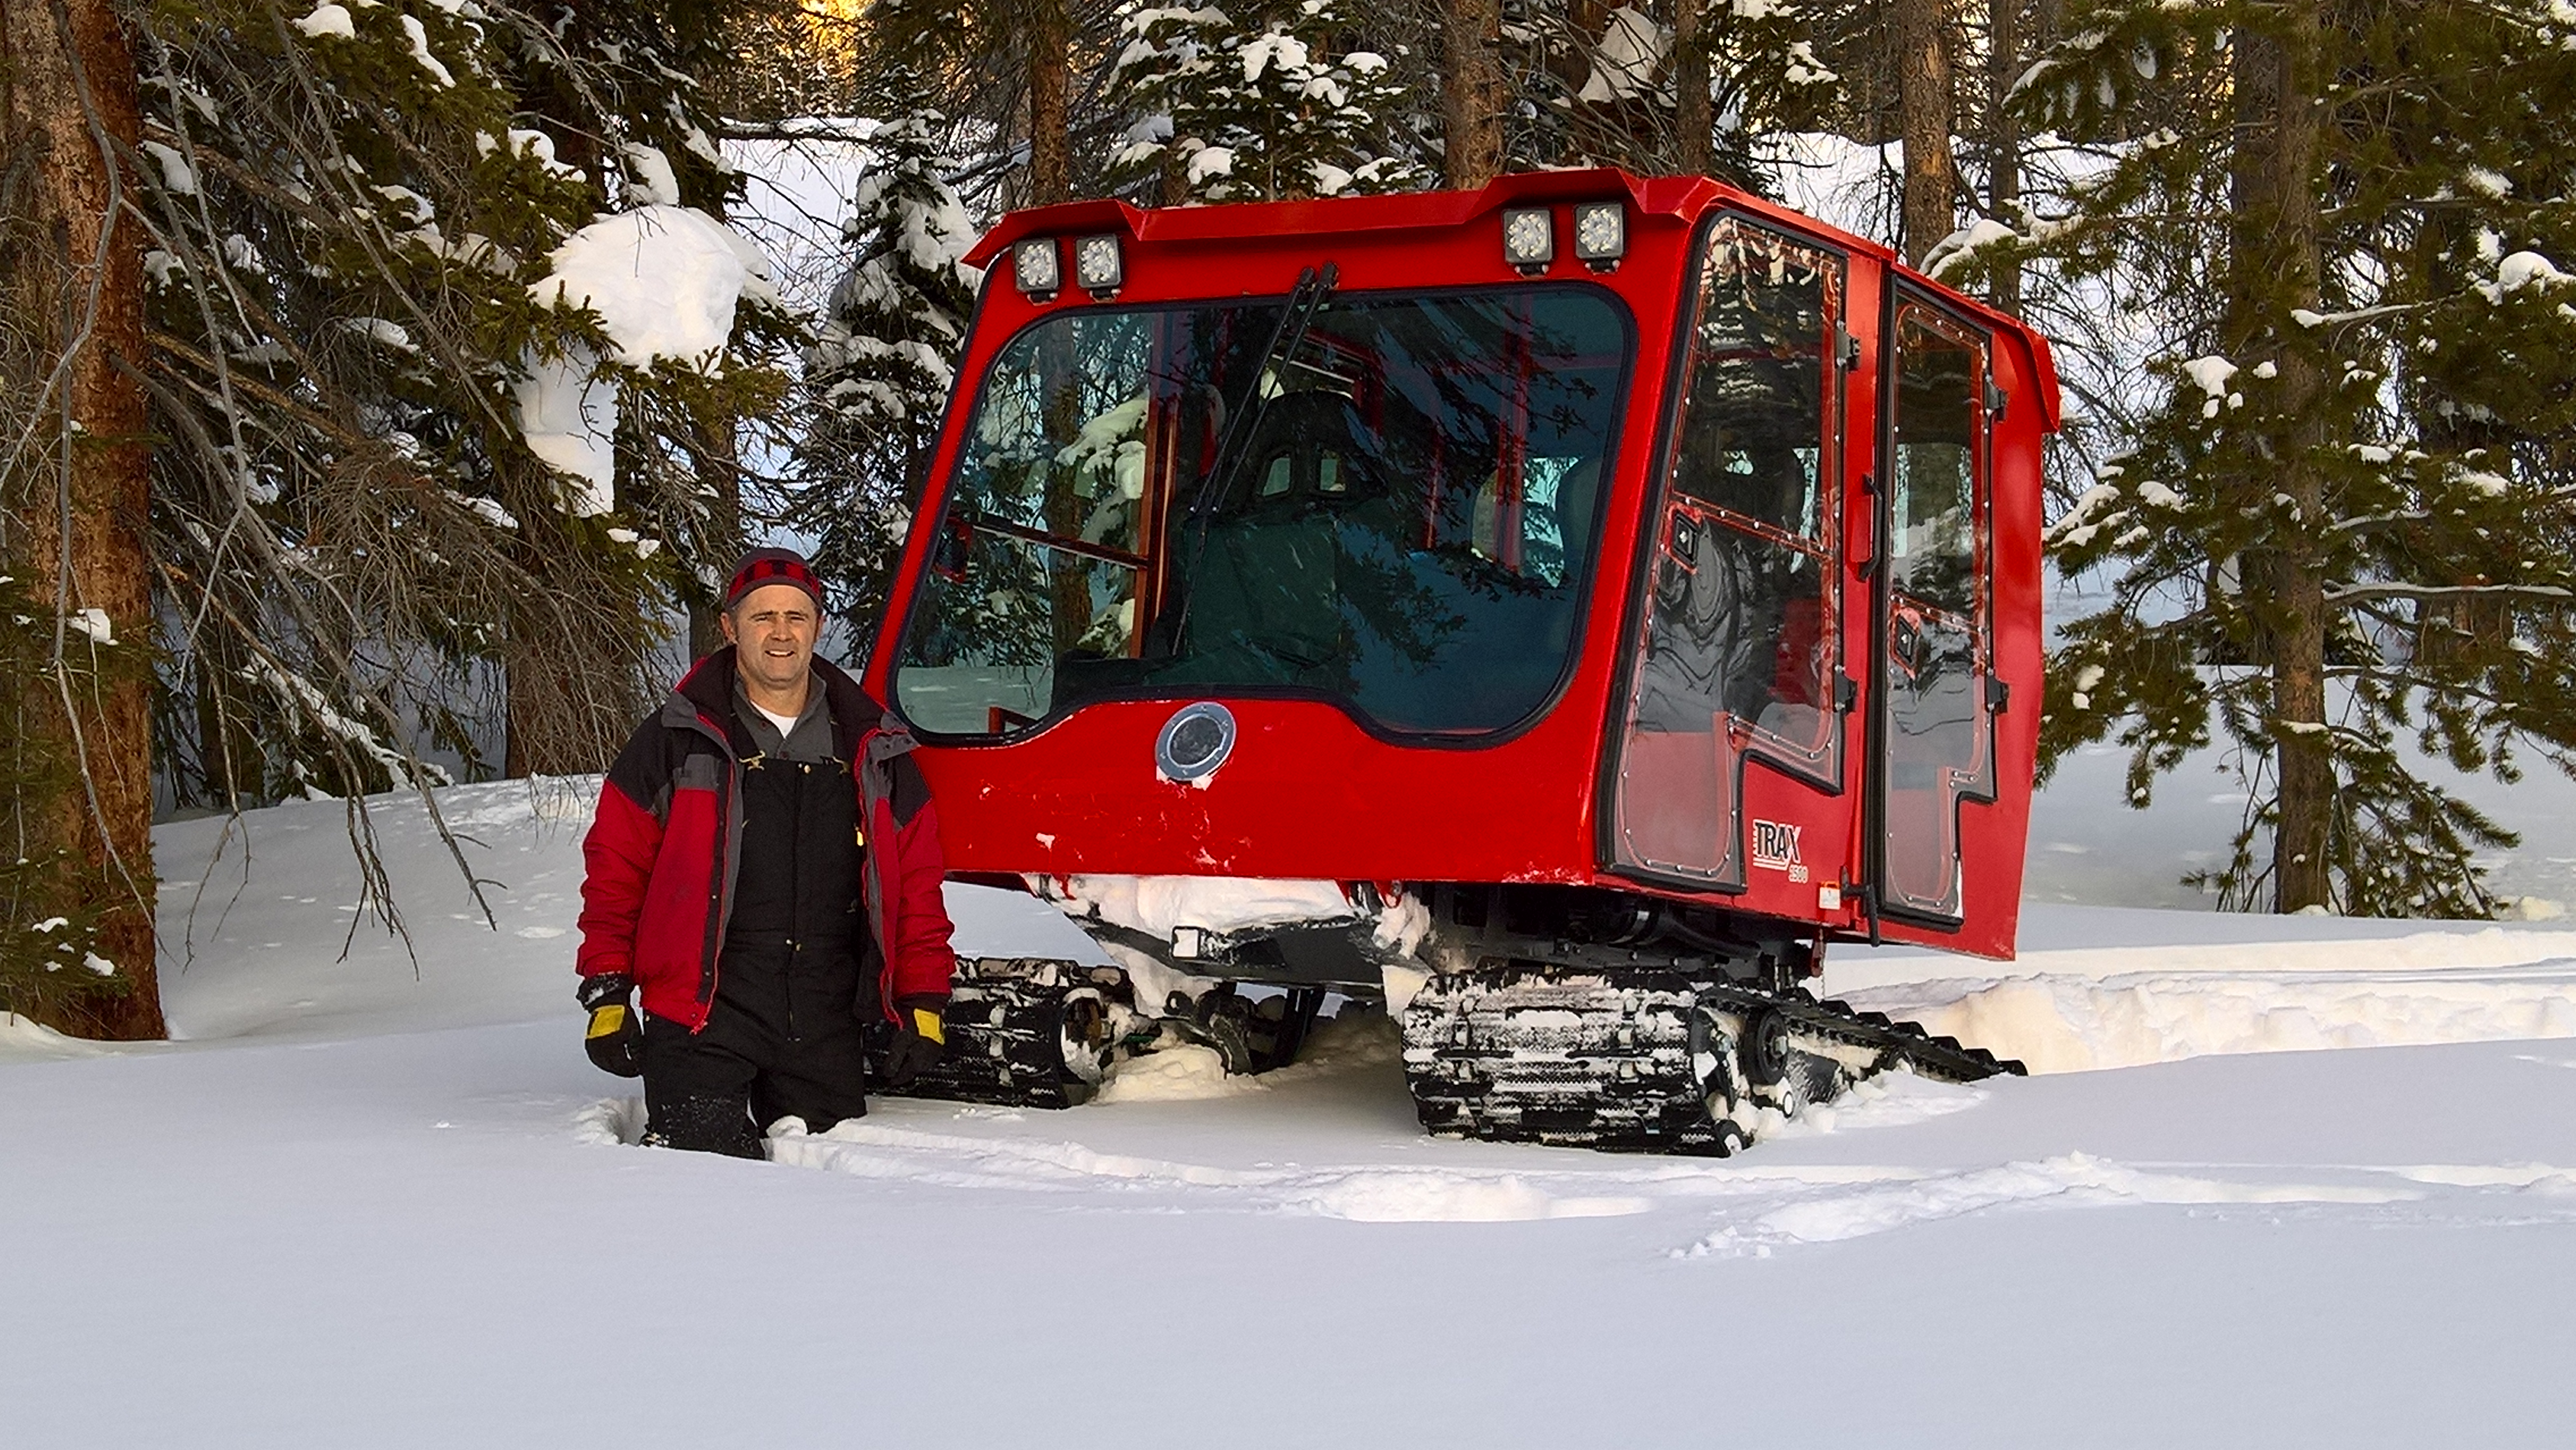 Winter In The Rockies: The Recreational Snow Machine You Need